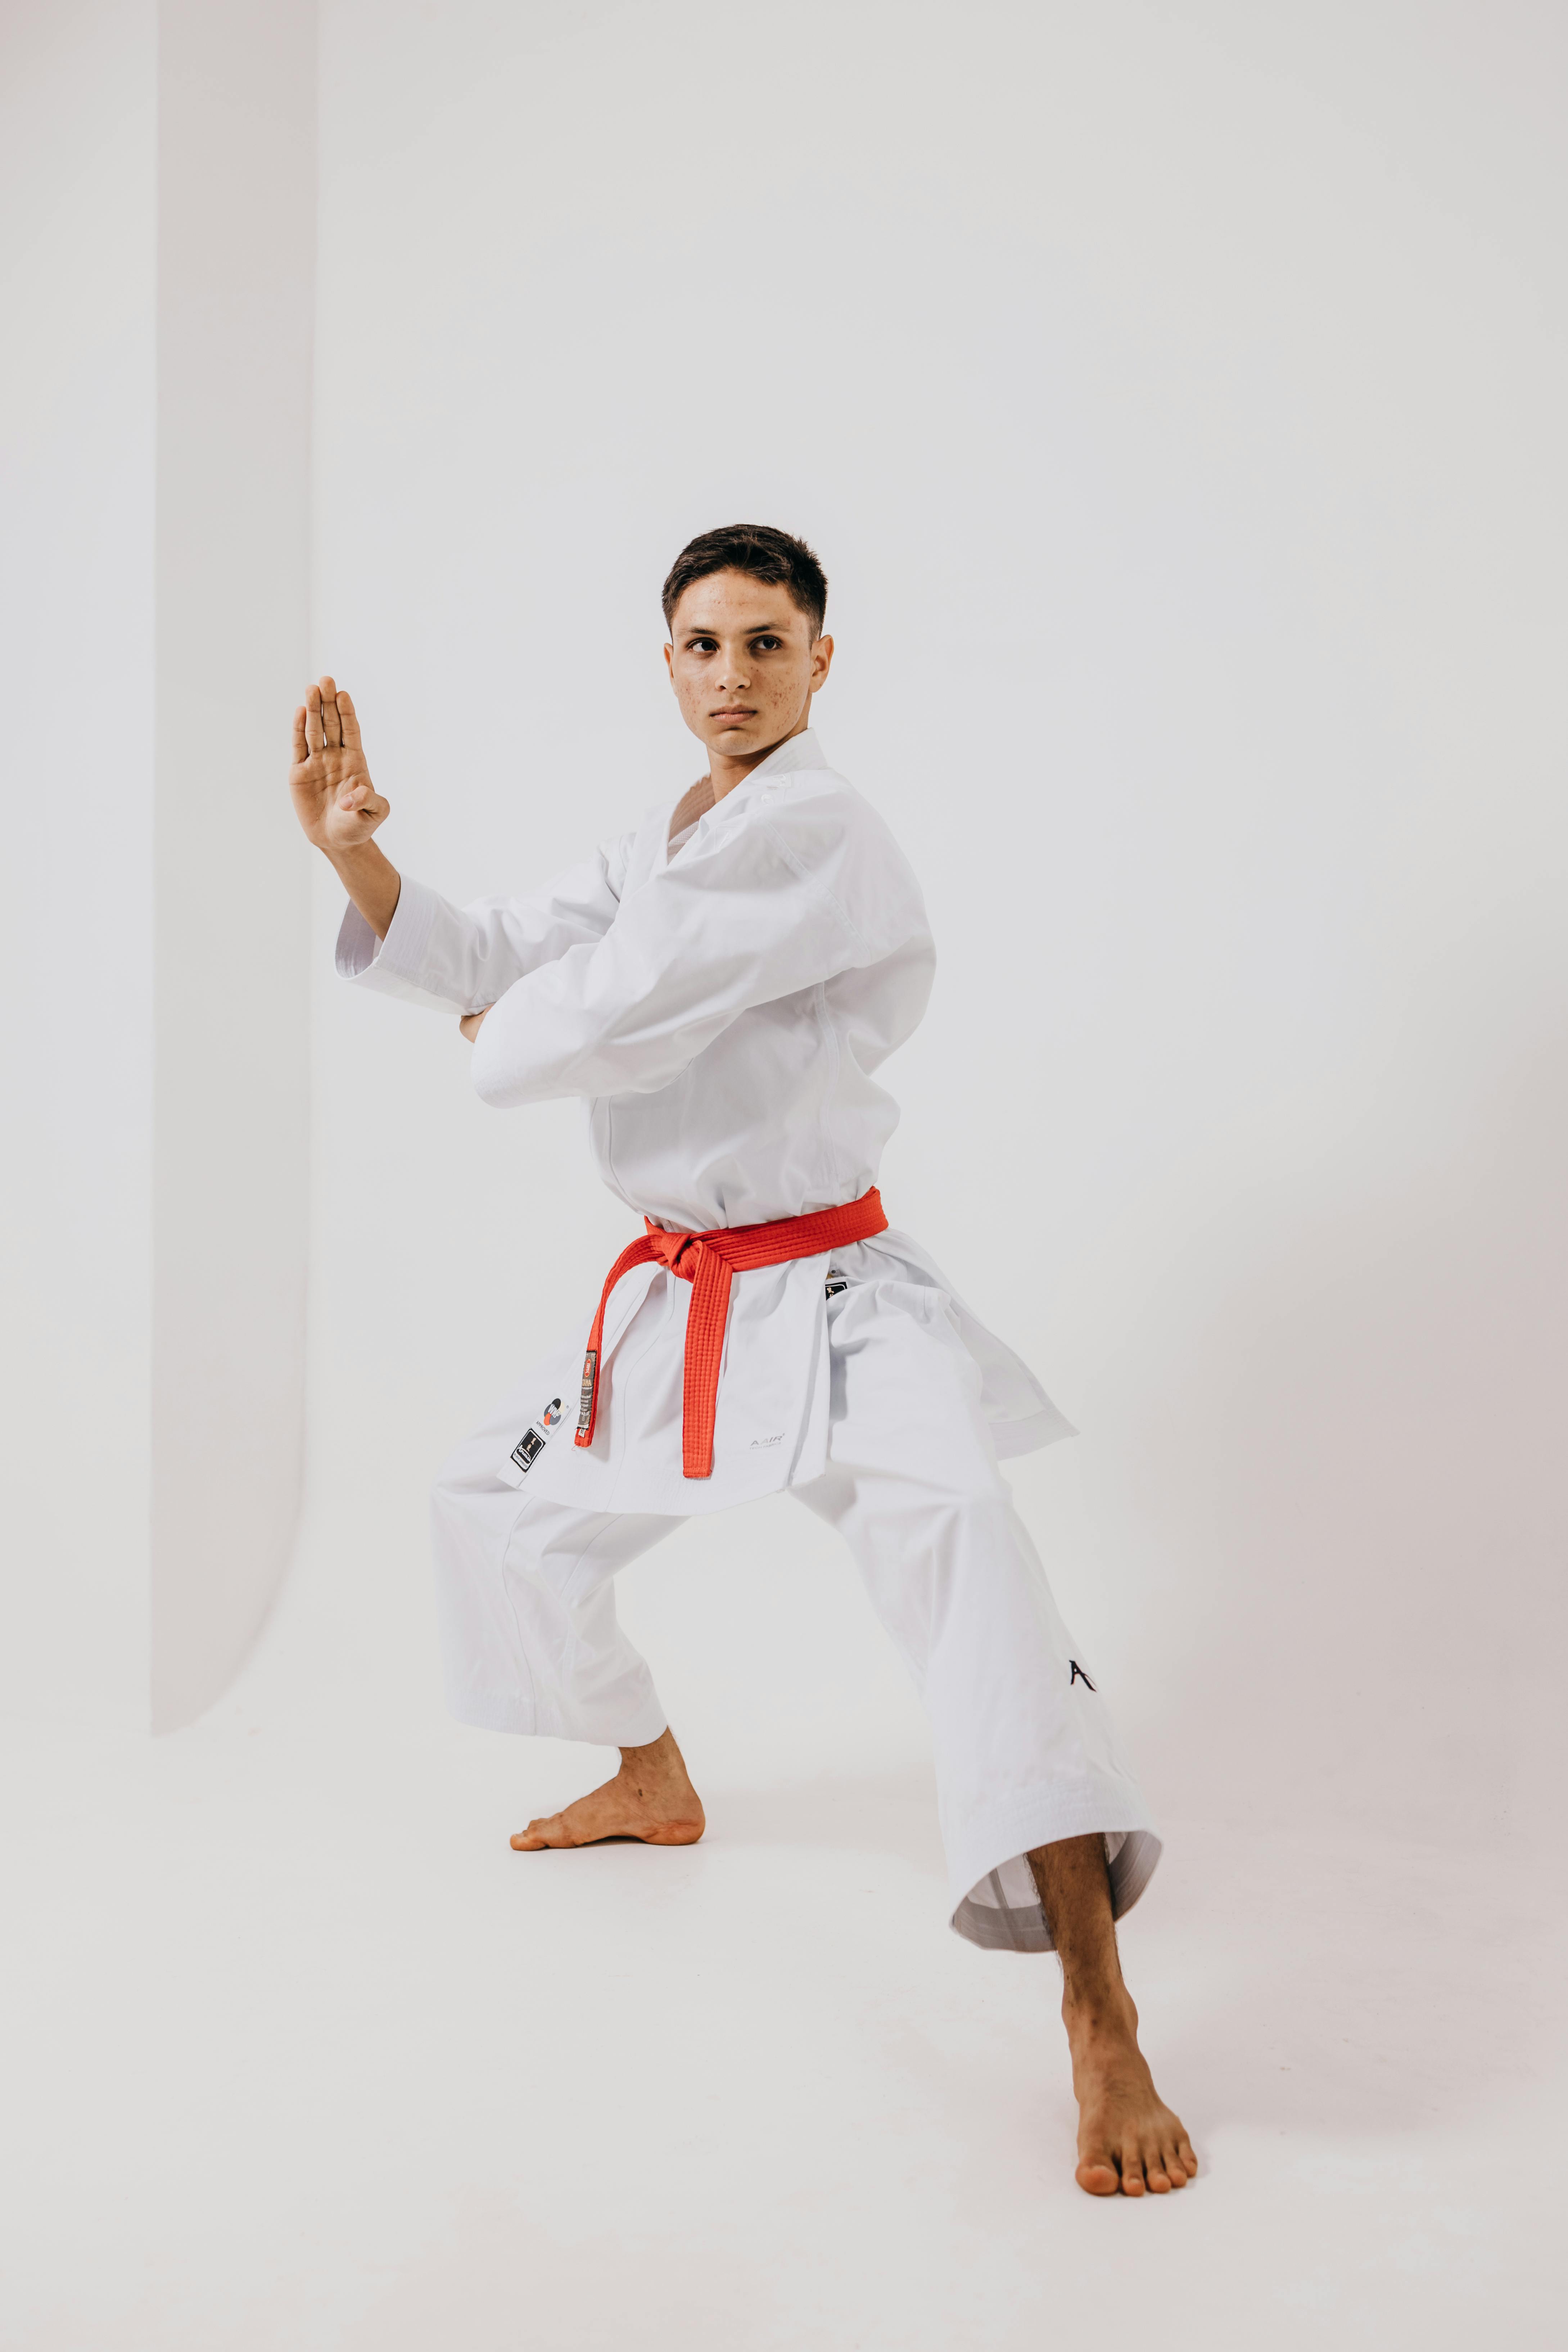 Brill's Karate - From $17 - Spotswood, NJ | Groupon